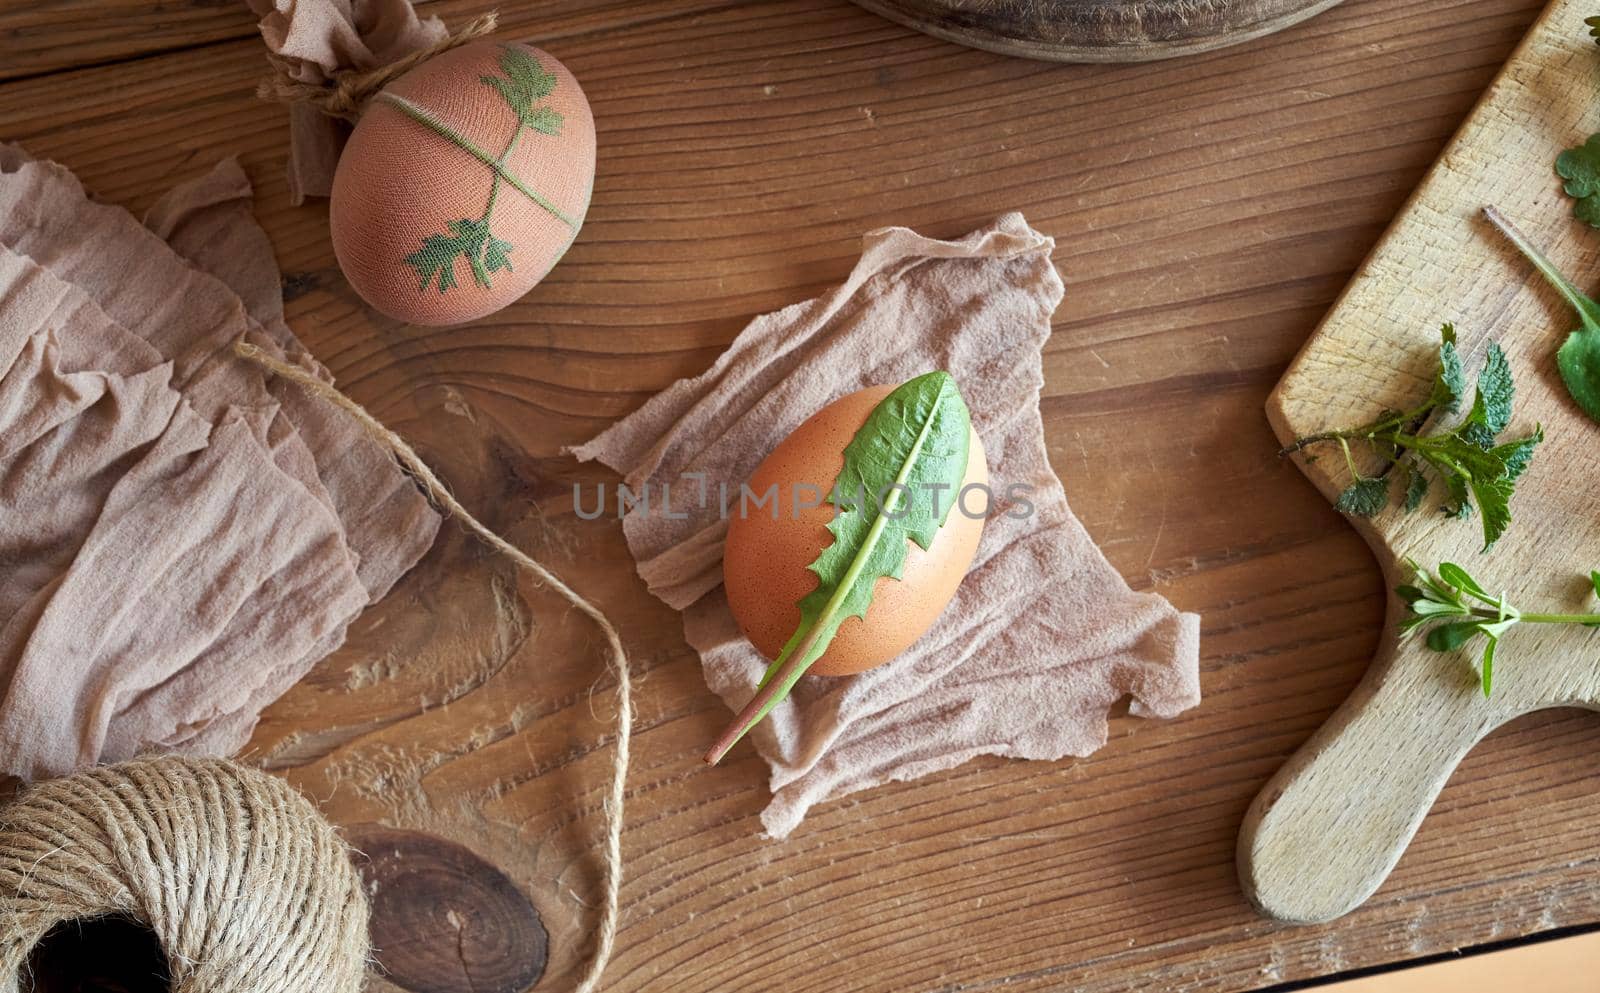 Preparation of Easter eggs for dying with onion peels by madeleine_steinbach